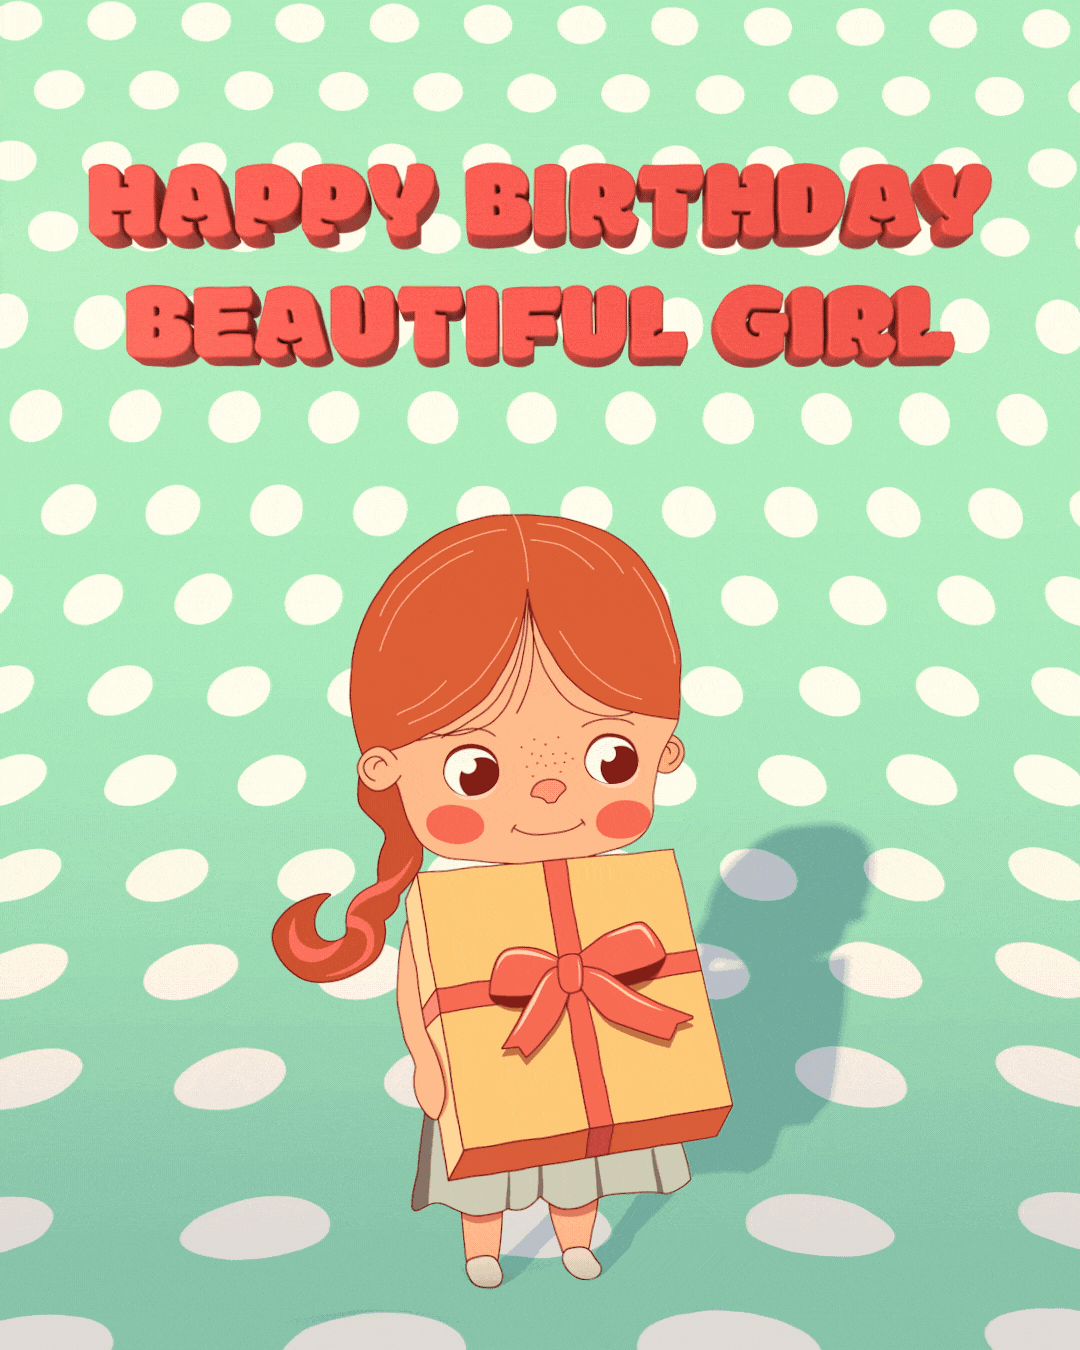 andreas ulrich recommends Happy Birthday Pretty Girl Gif